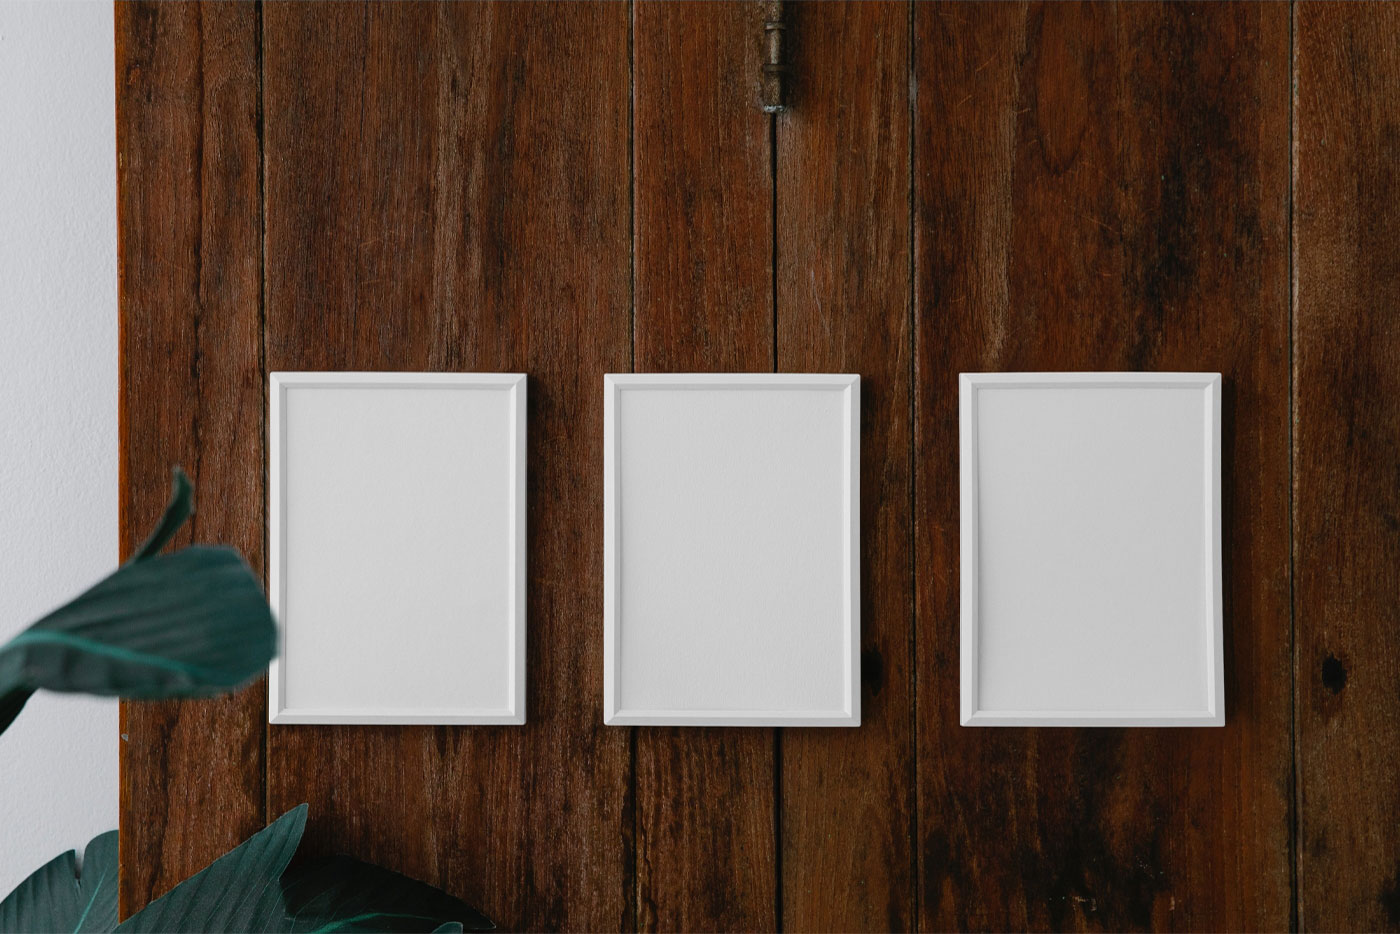 Front View of 3 Minimal Posters Mockup on Wood Wall FREE PSD